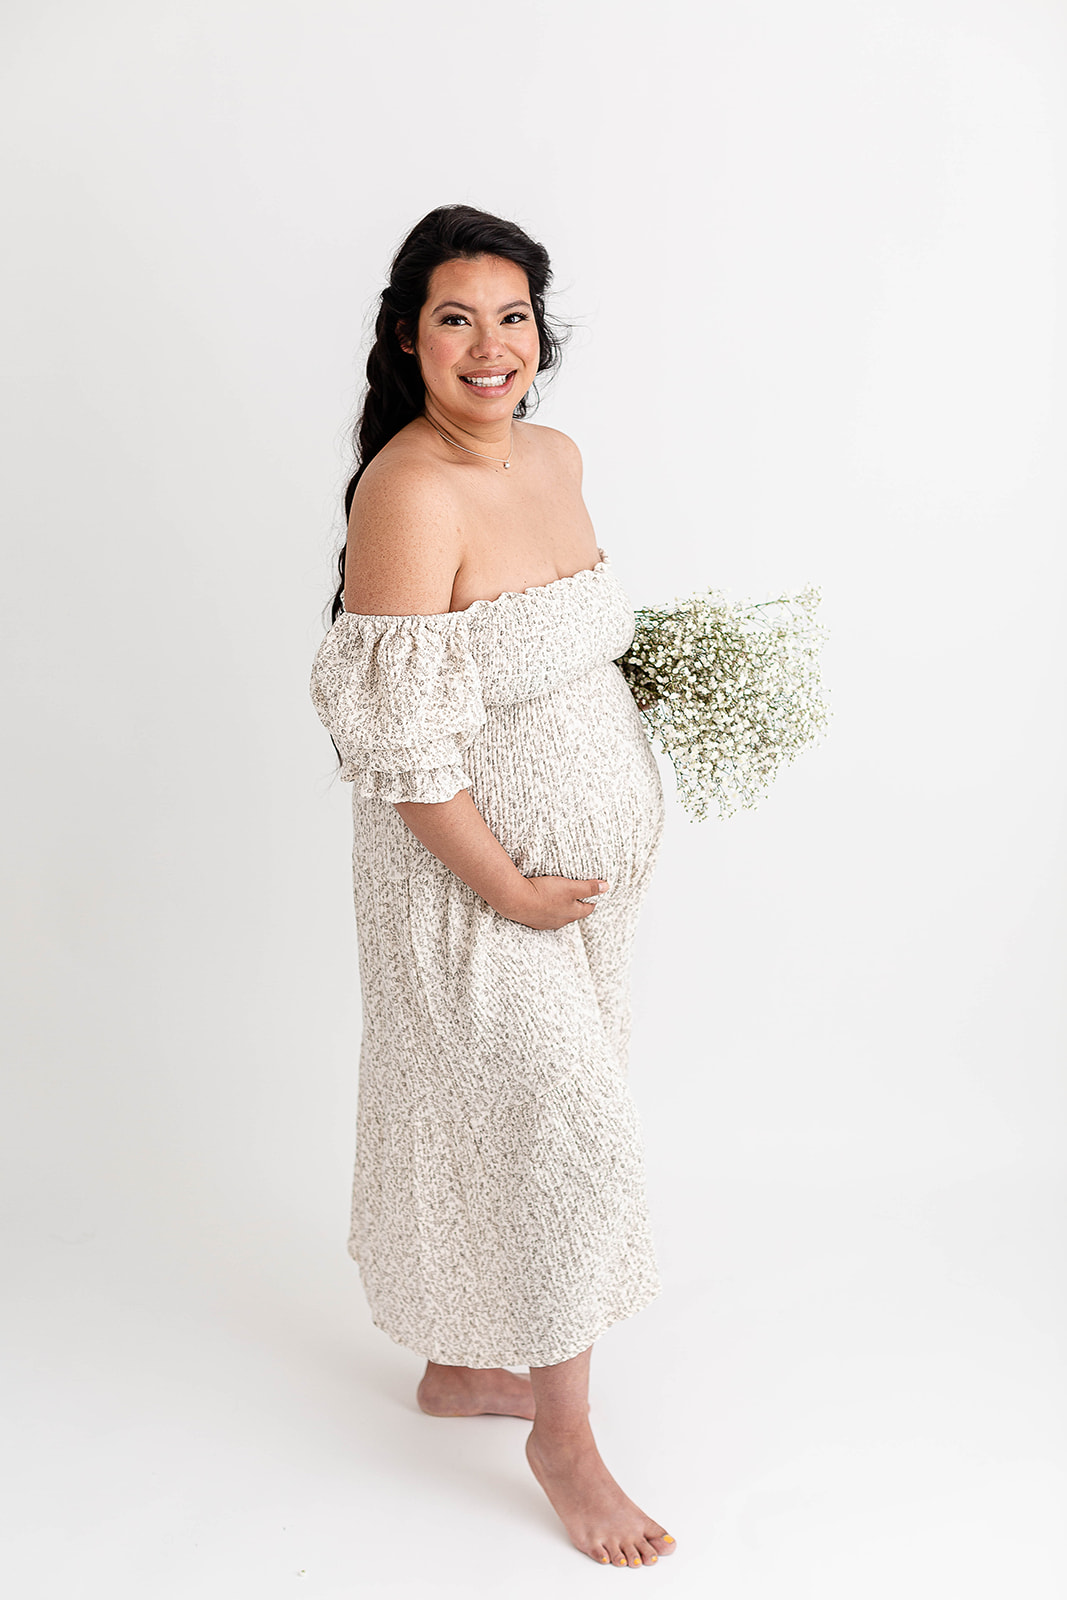 A mom to be in a white maternity dress stands in a studio holding a bouquet of white flowers and her bump before calling a Portland Lactation Consultant